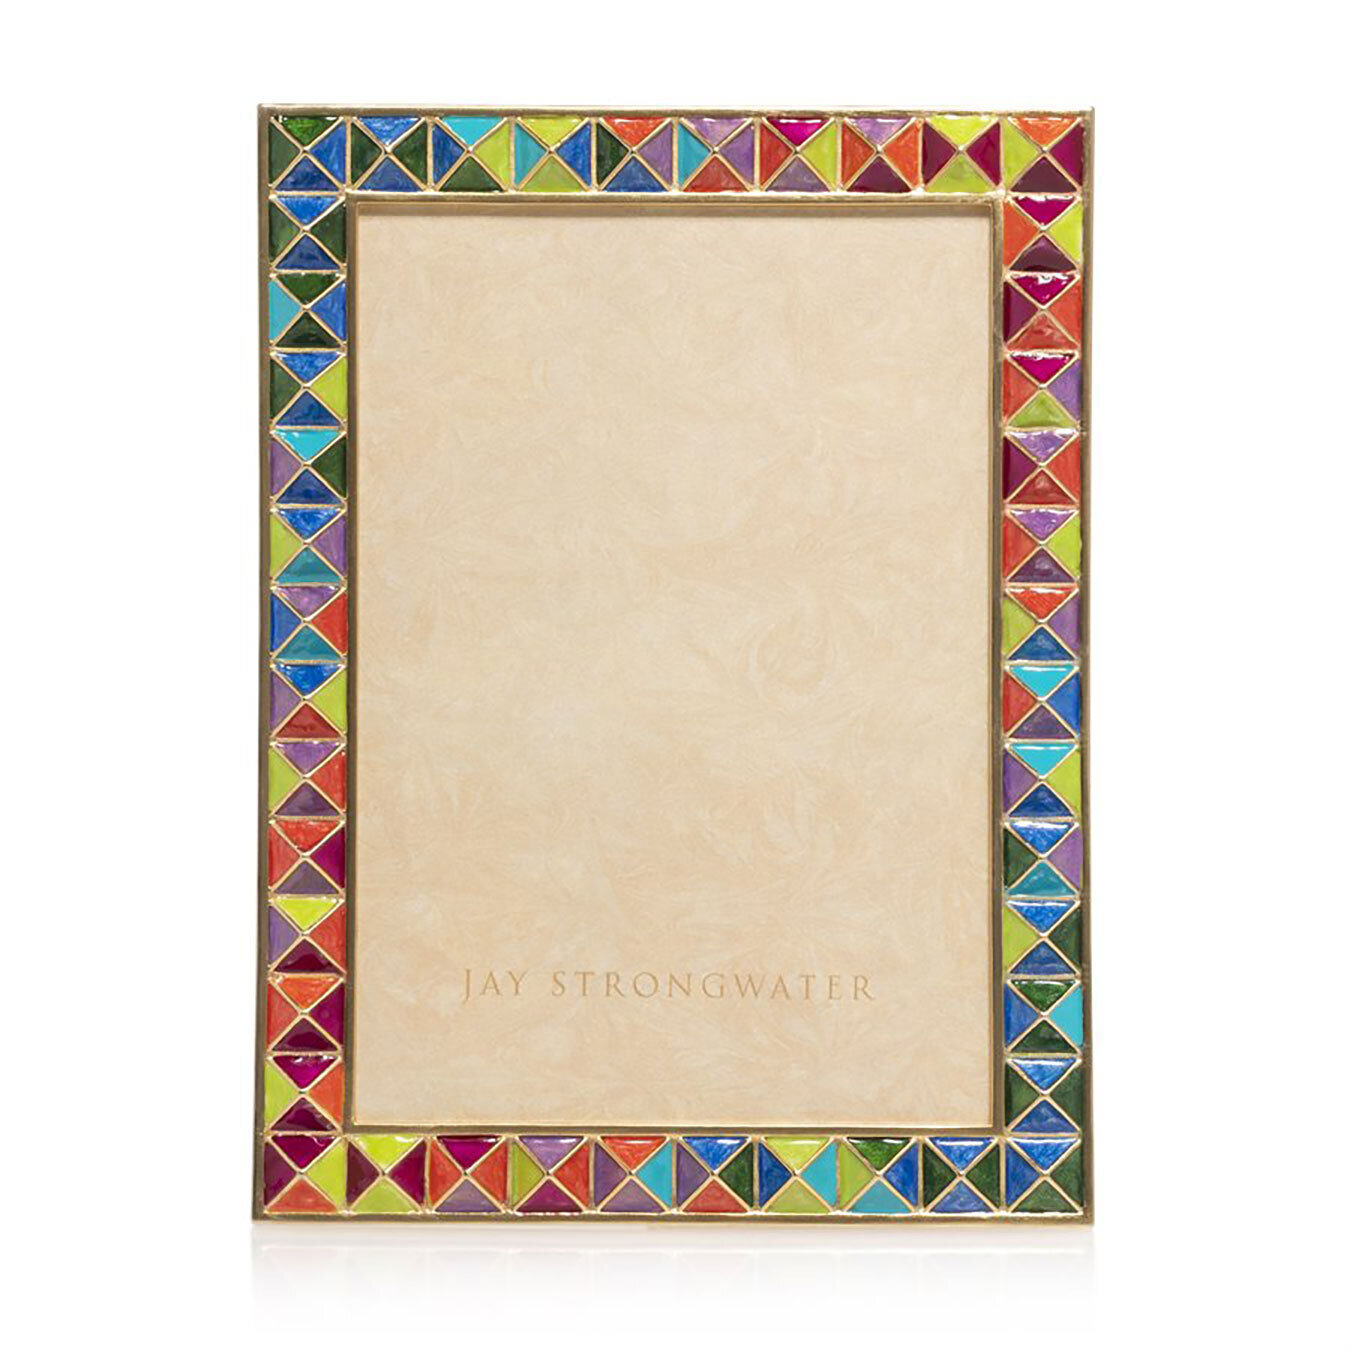 Jay Strongwater Pyramid 5 X 7 Inch Picture Frame SPF5877-202